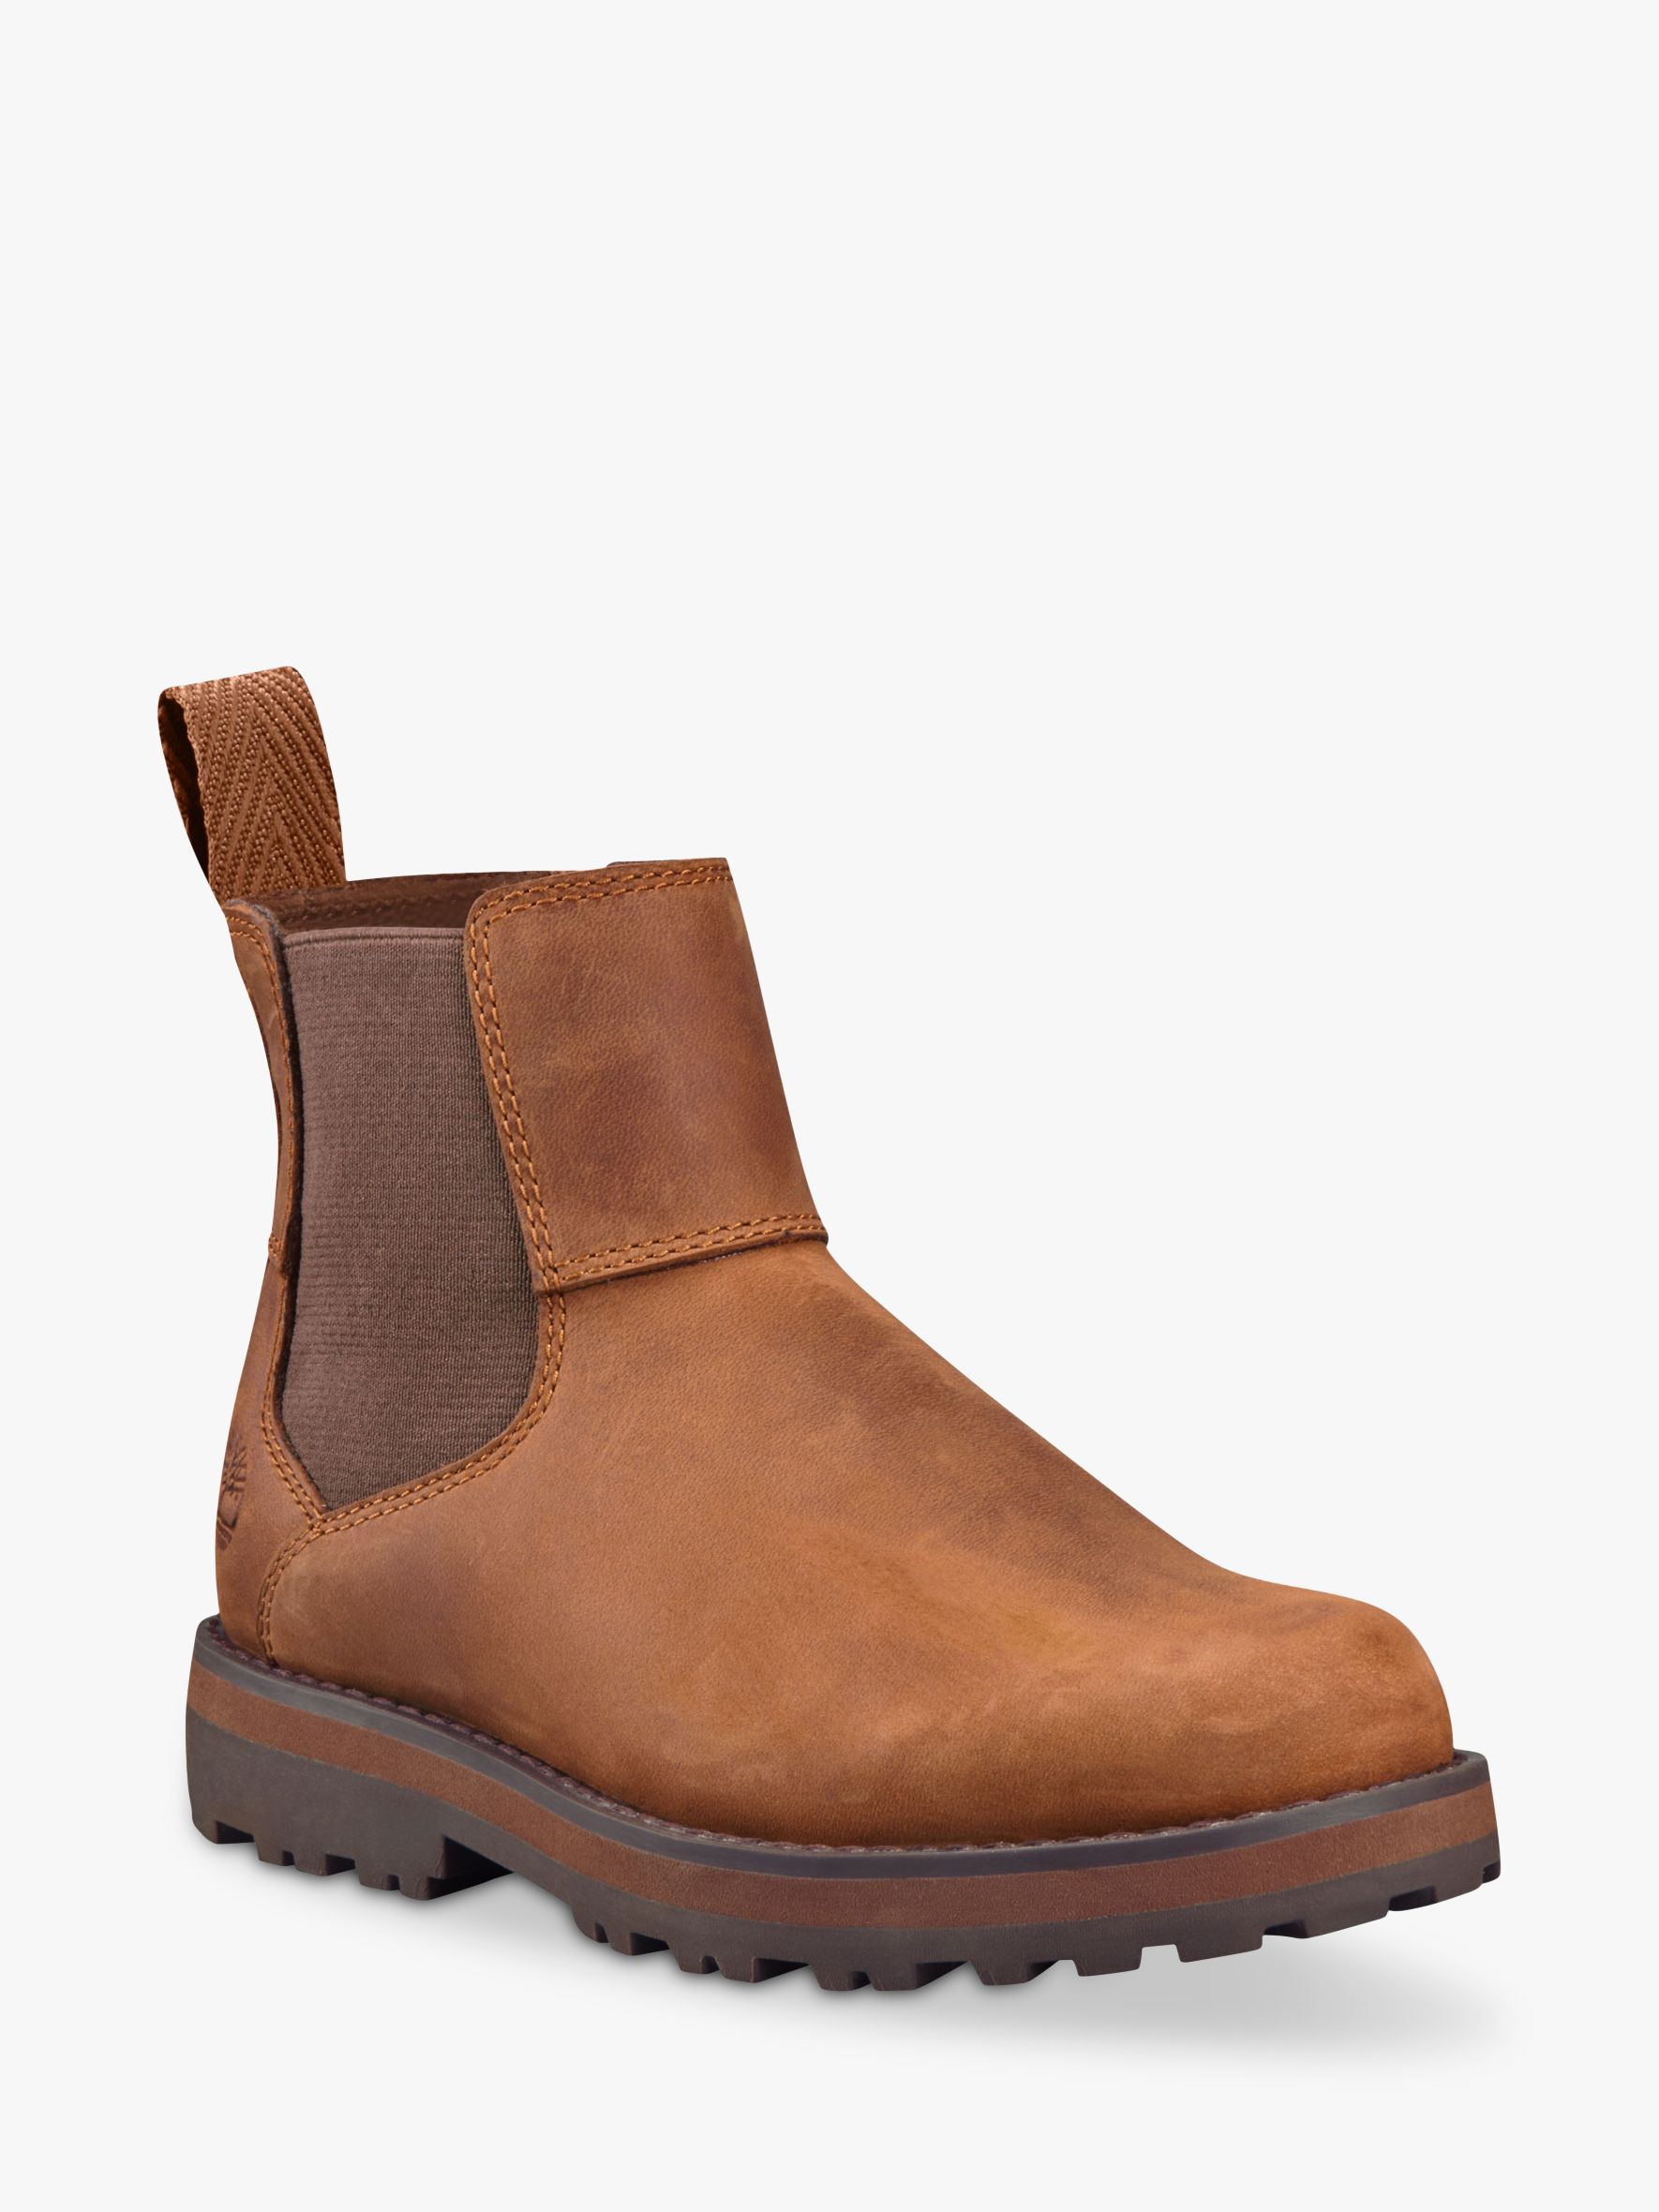 Courma Kid Chelsea Boots, Brown 